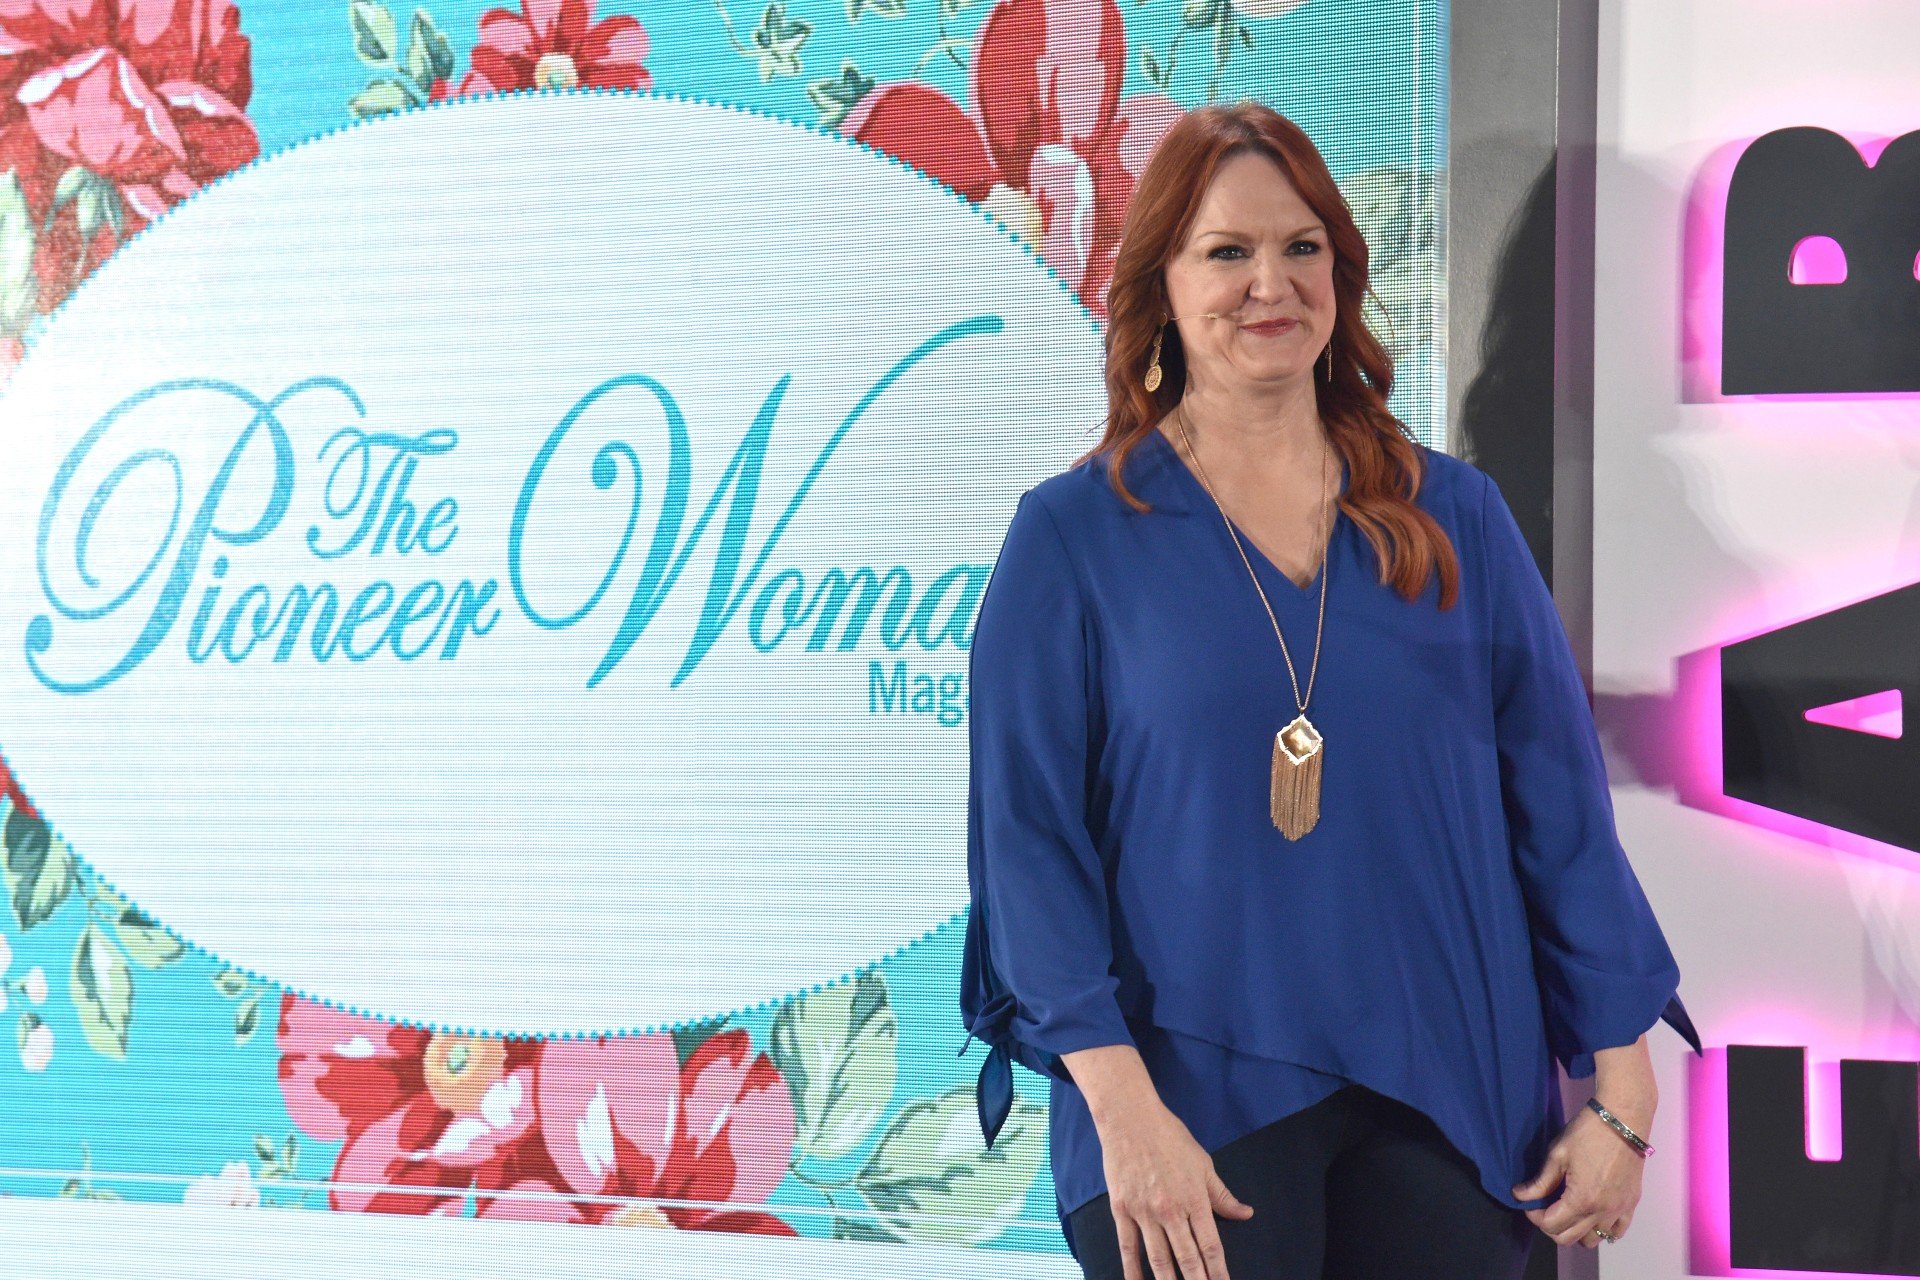 Ree Drummond wears a royal blue shirt while speaking at a Pioneer Woman event.